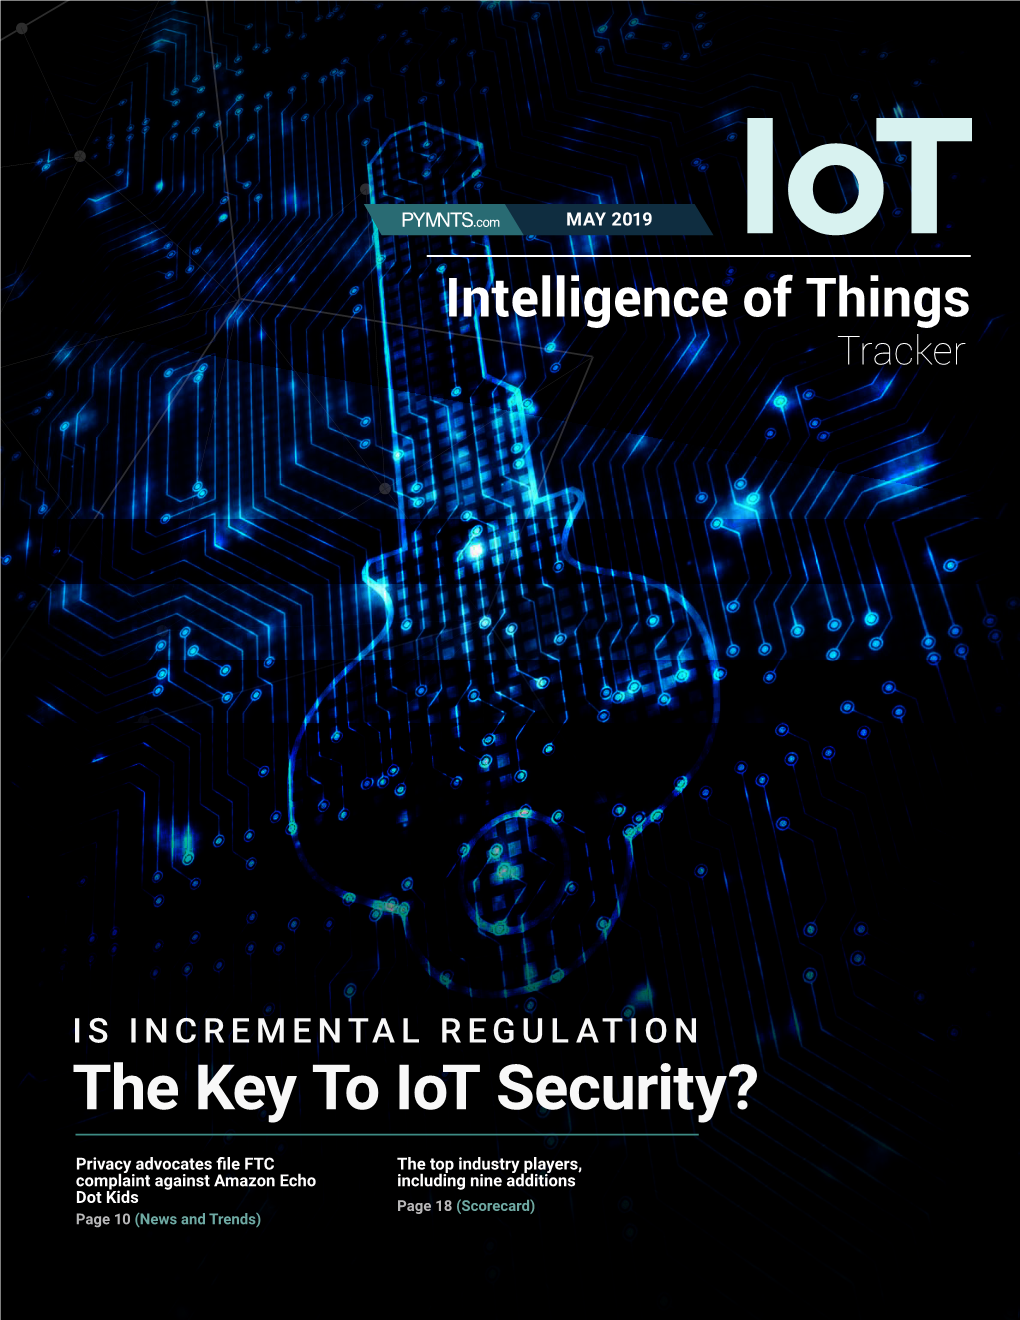 The Key to Iot Security?